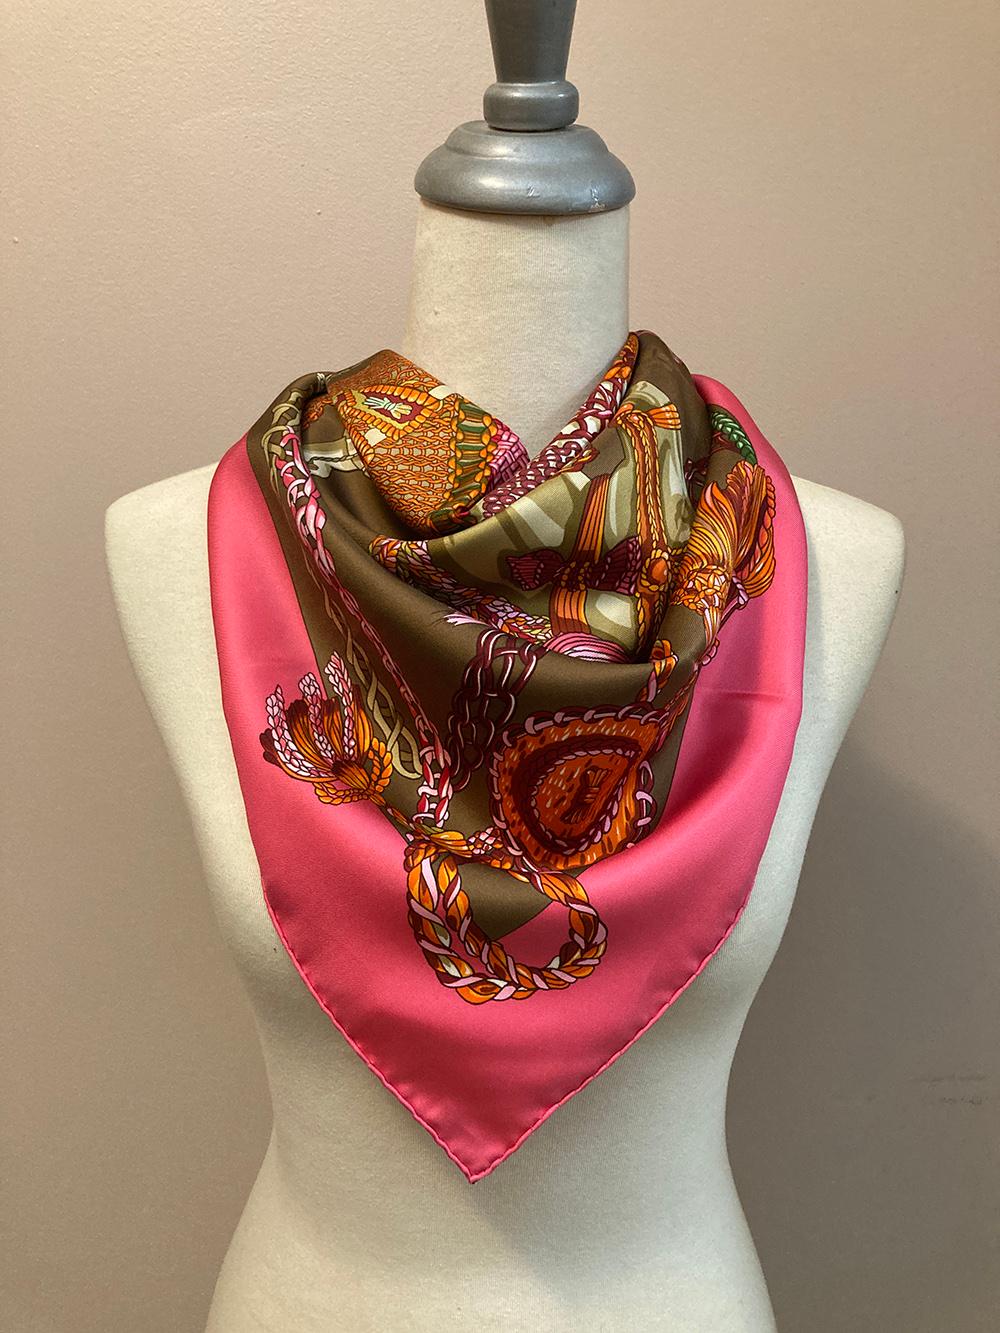 Hermes Le Timbalier Silk Scarf in Pink and Brown c1960s in excellent condition. Original silk screen design c1961 by Françoise Heron features an extravagant horse and rider with colorful braided tassels, ribbons, ropes, dress and garb in green,